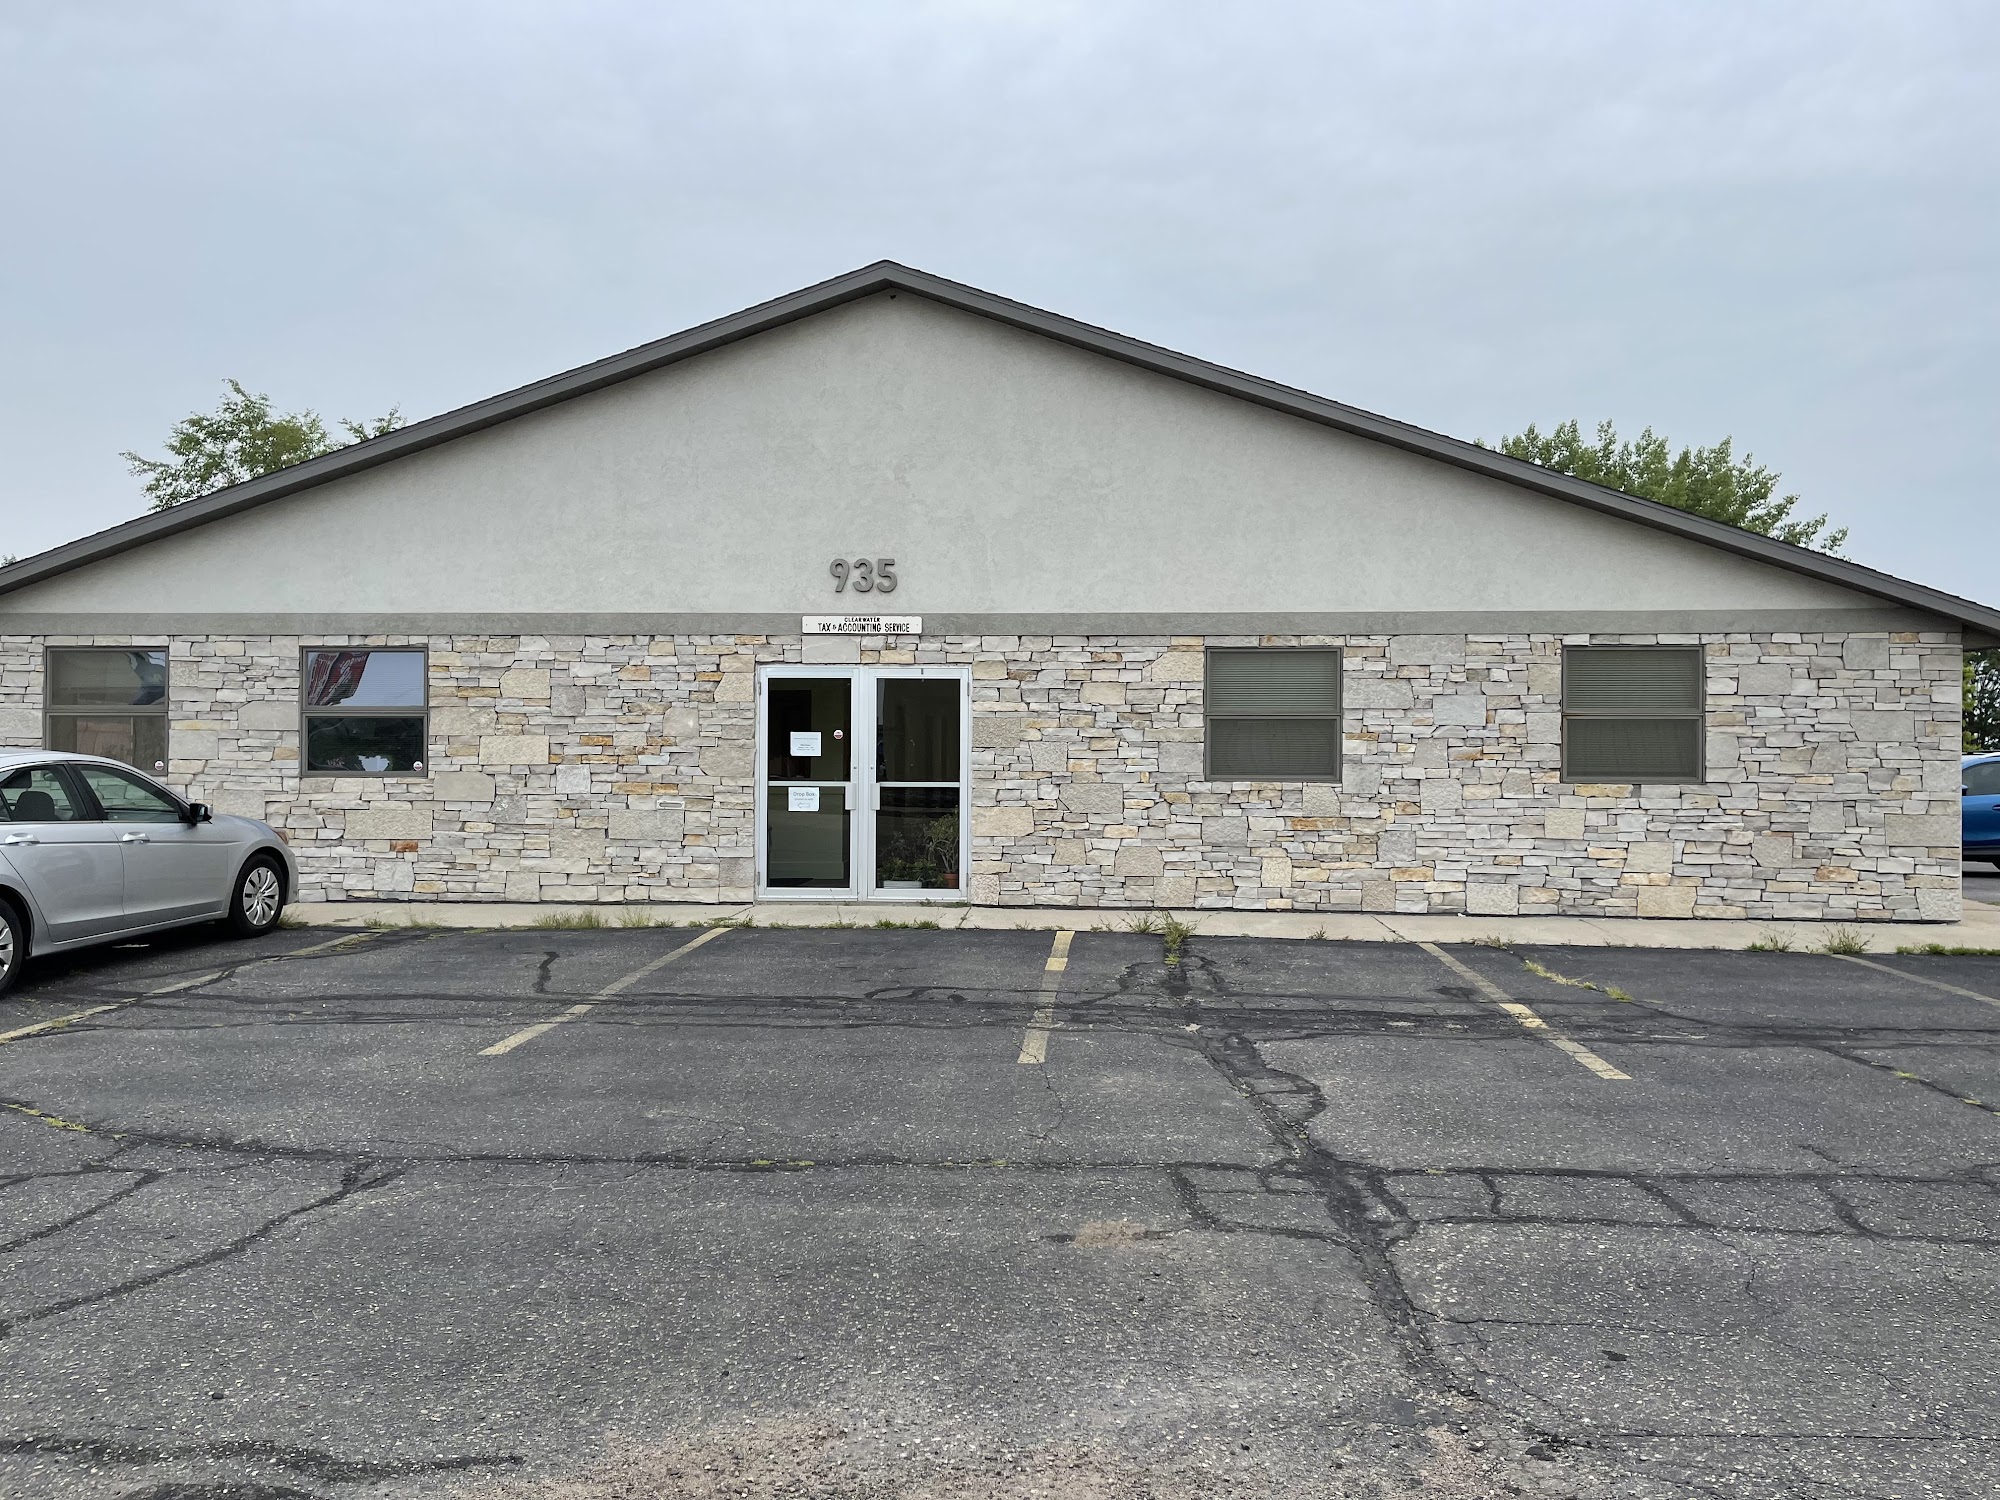 Clearwater Tax & Accounting 935 Clearwater Center, Clearwater Minnesota 55320